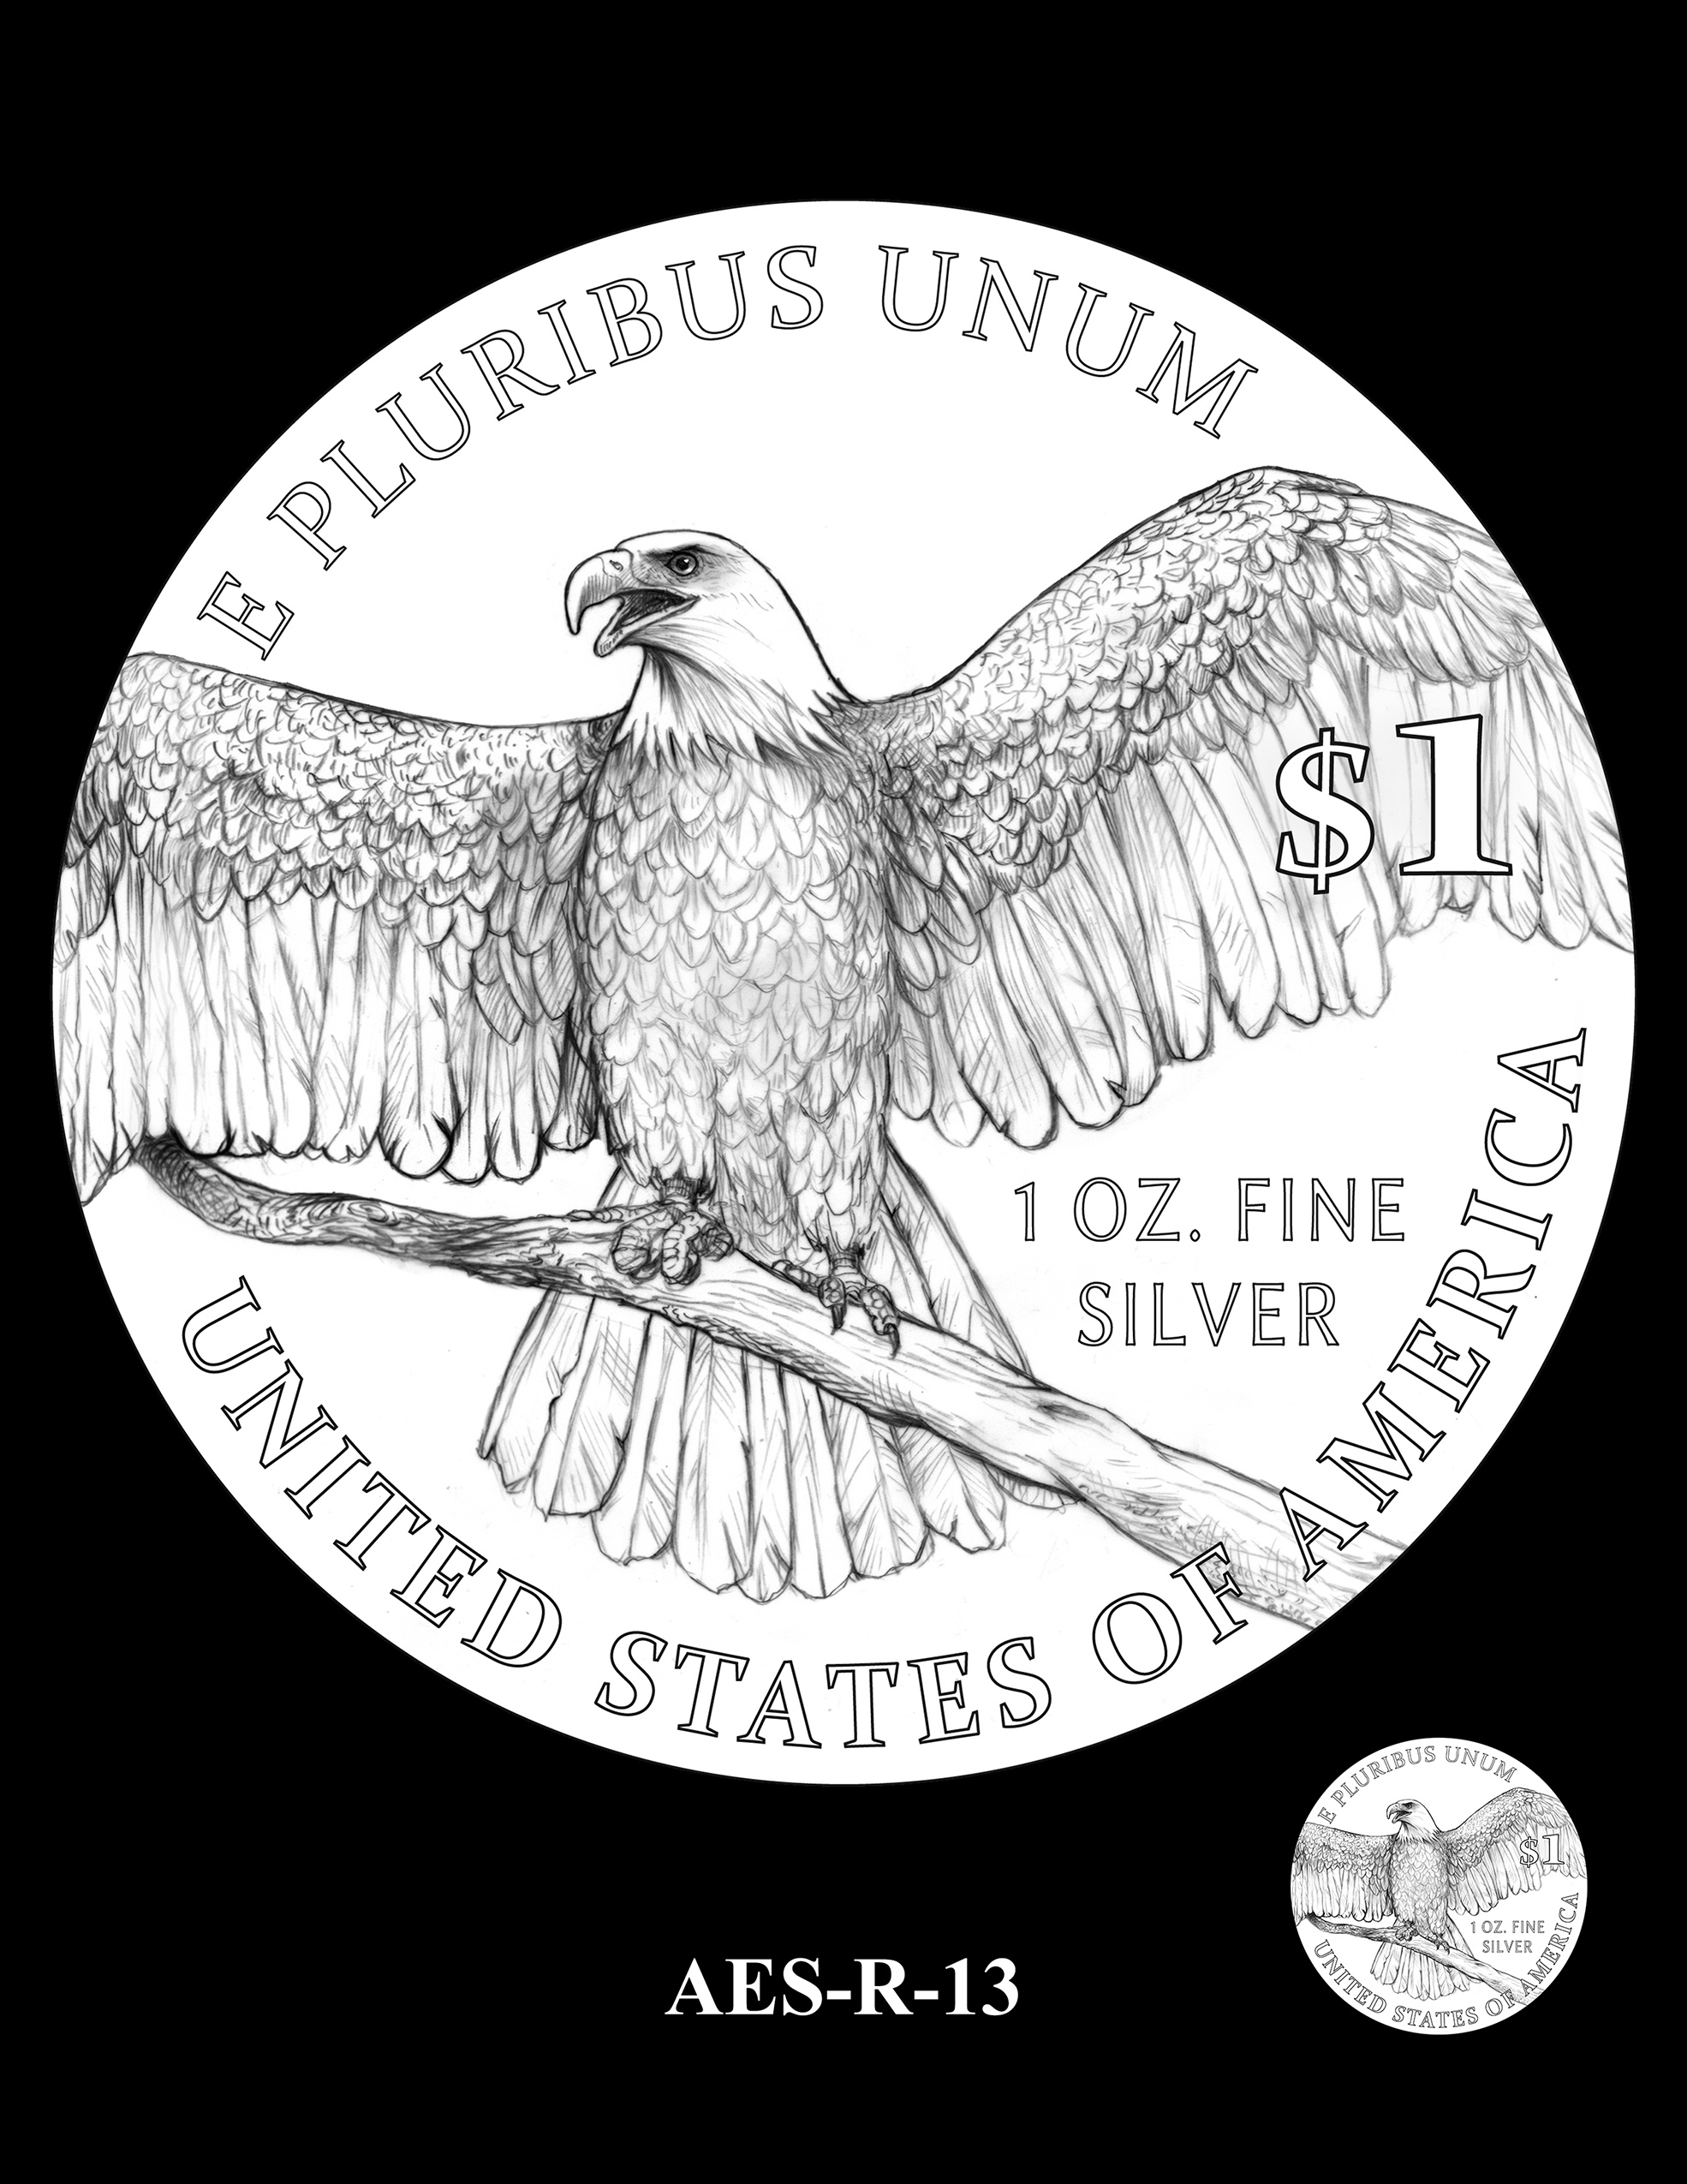 AES-R-13 -- American Eagle Proof and Bullion Silver Coin - Reverse